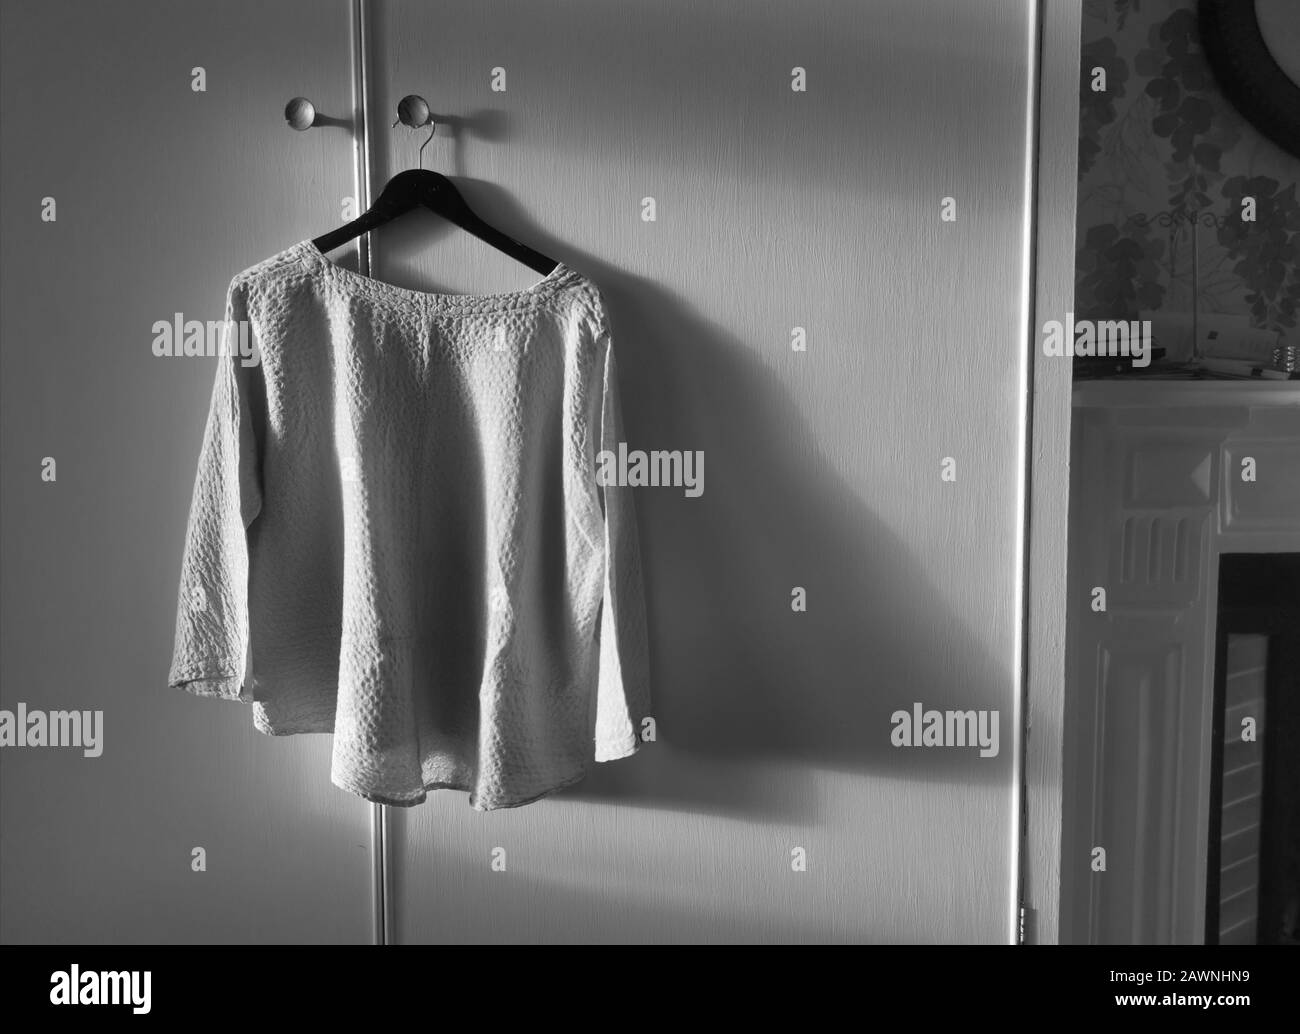 Monochrome image of ladies blouse on hanger with shadows Stock Photo